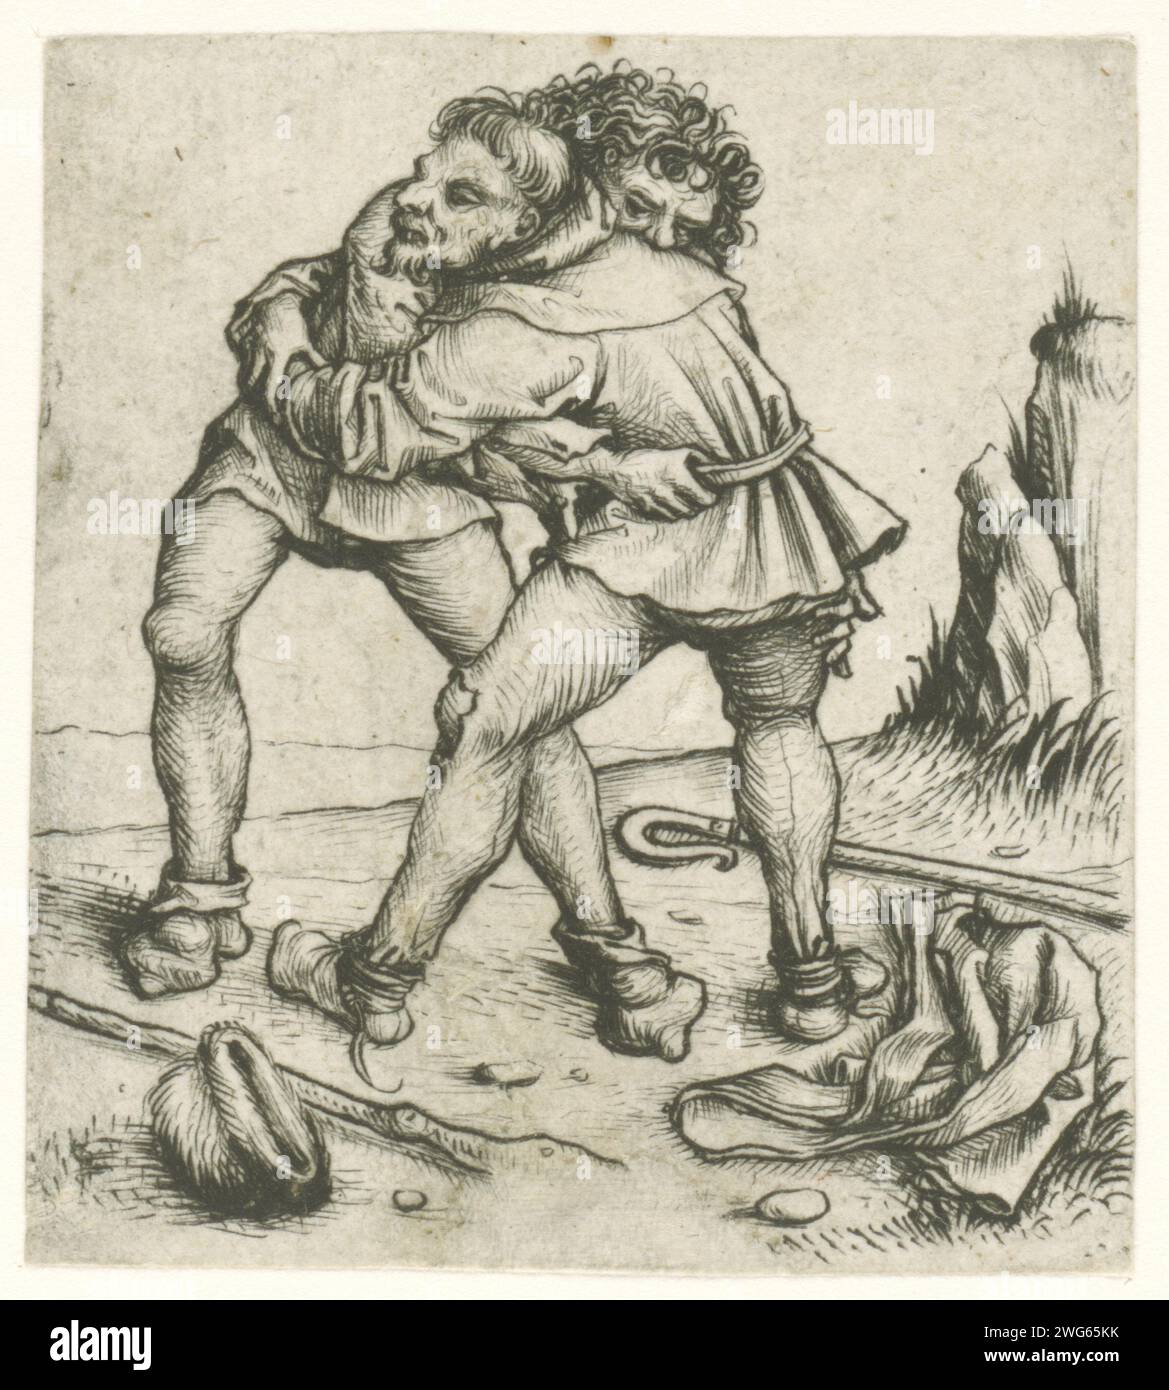 Two wrestling farmers, master of the Amsterdam cabinet, 1475 - 1480 print Two wrestling farmers, dressed in Wambuis with belt. On the floor are their sticks, a fur hat and other items of clothing. Germany paper drypoint clothing for the upper part of the body (with NAME) (+ men's clothes). head-gear: hat (+ men's clothes). wrestling (sport). walking-stick, staff, cane (+ men's clothes). shoes, sandals (+ men's clothes). trousers, breeches, etc. (BREECHES) (+ men's clothes) Germany Stock Photo